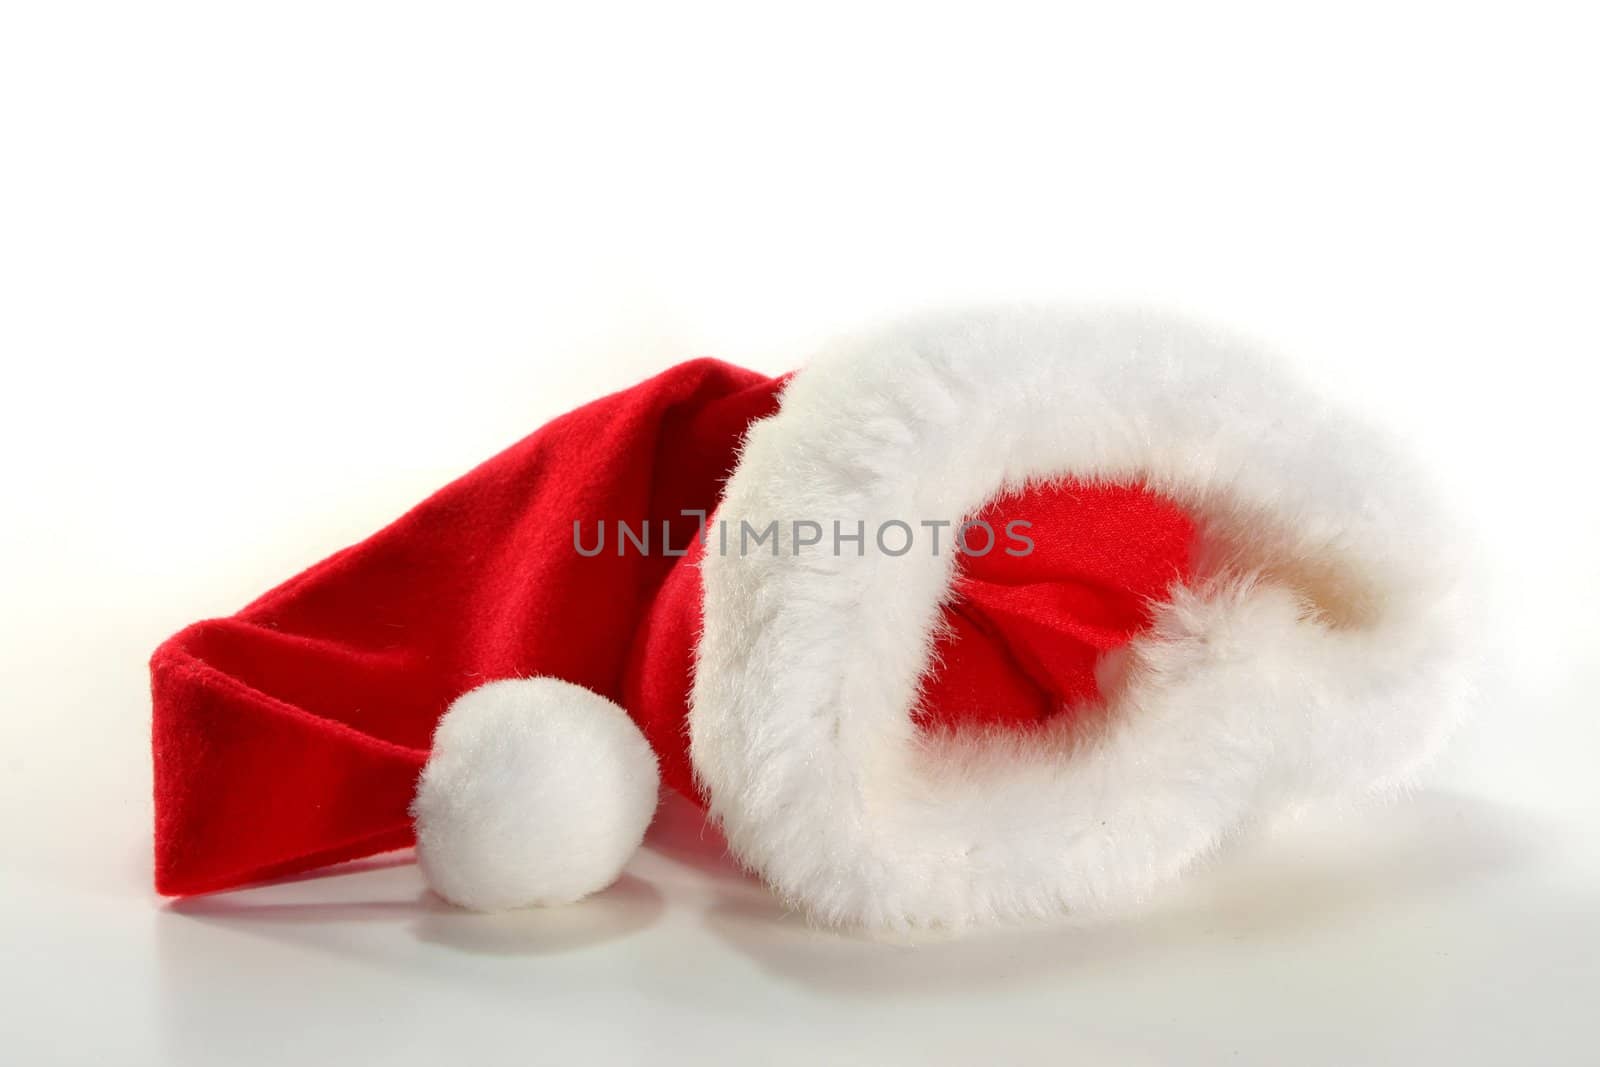 a Santa Claus hat on a light background
